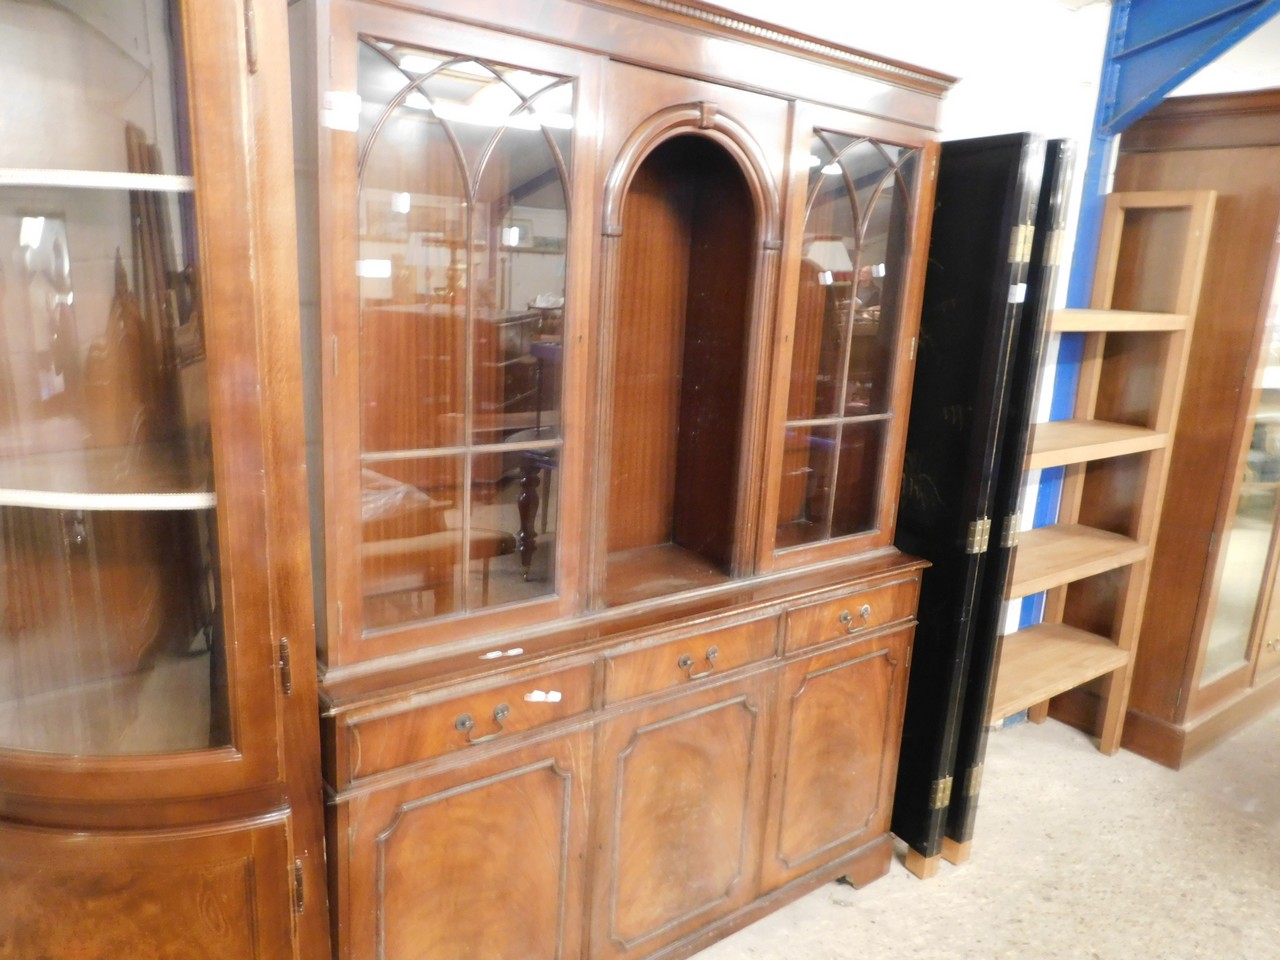 REPRODUCTION MAHOGANY LIVING ROOM CABINET WITH CENTRAL ARCHED OPEN SHELF FLANKED EITHER SIDE BY